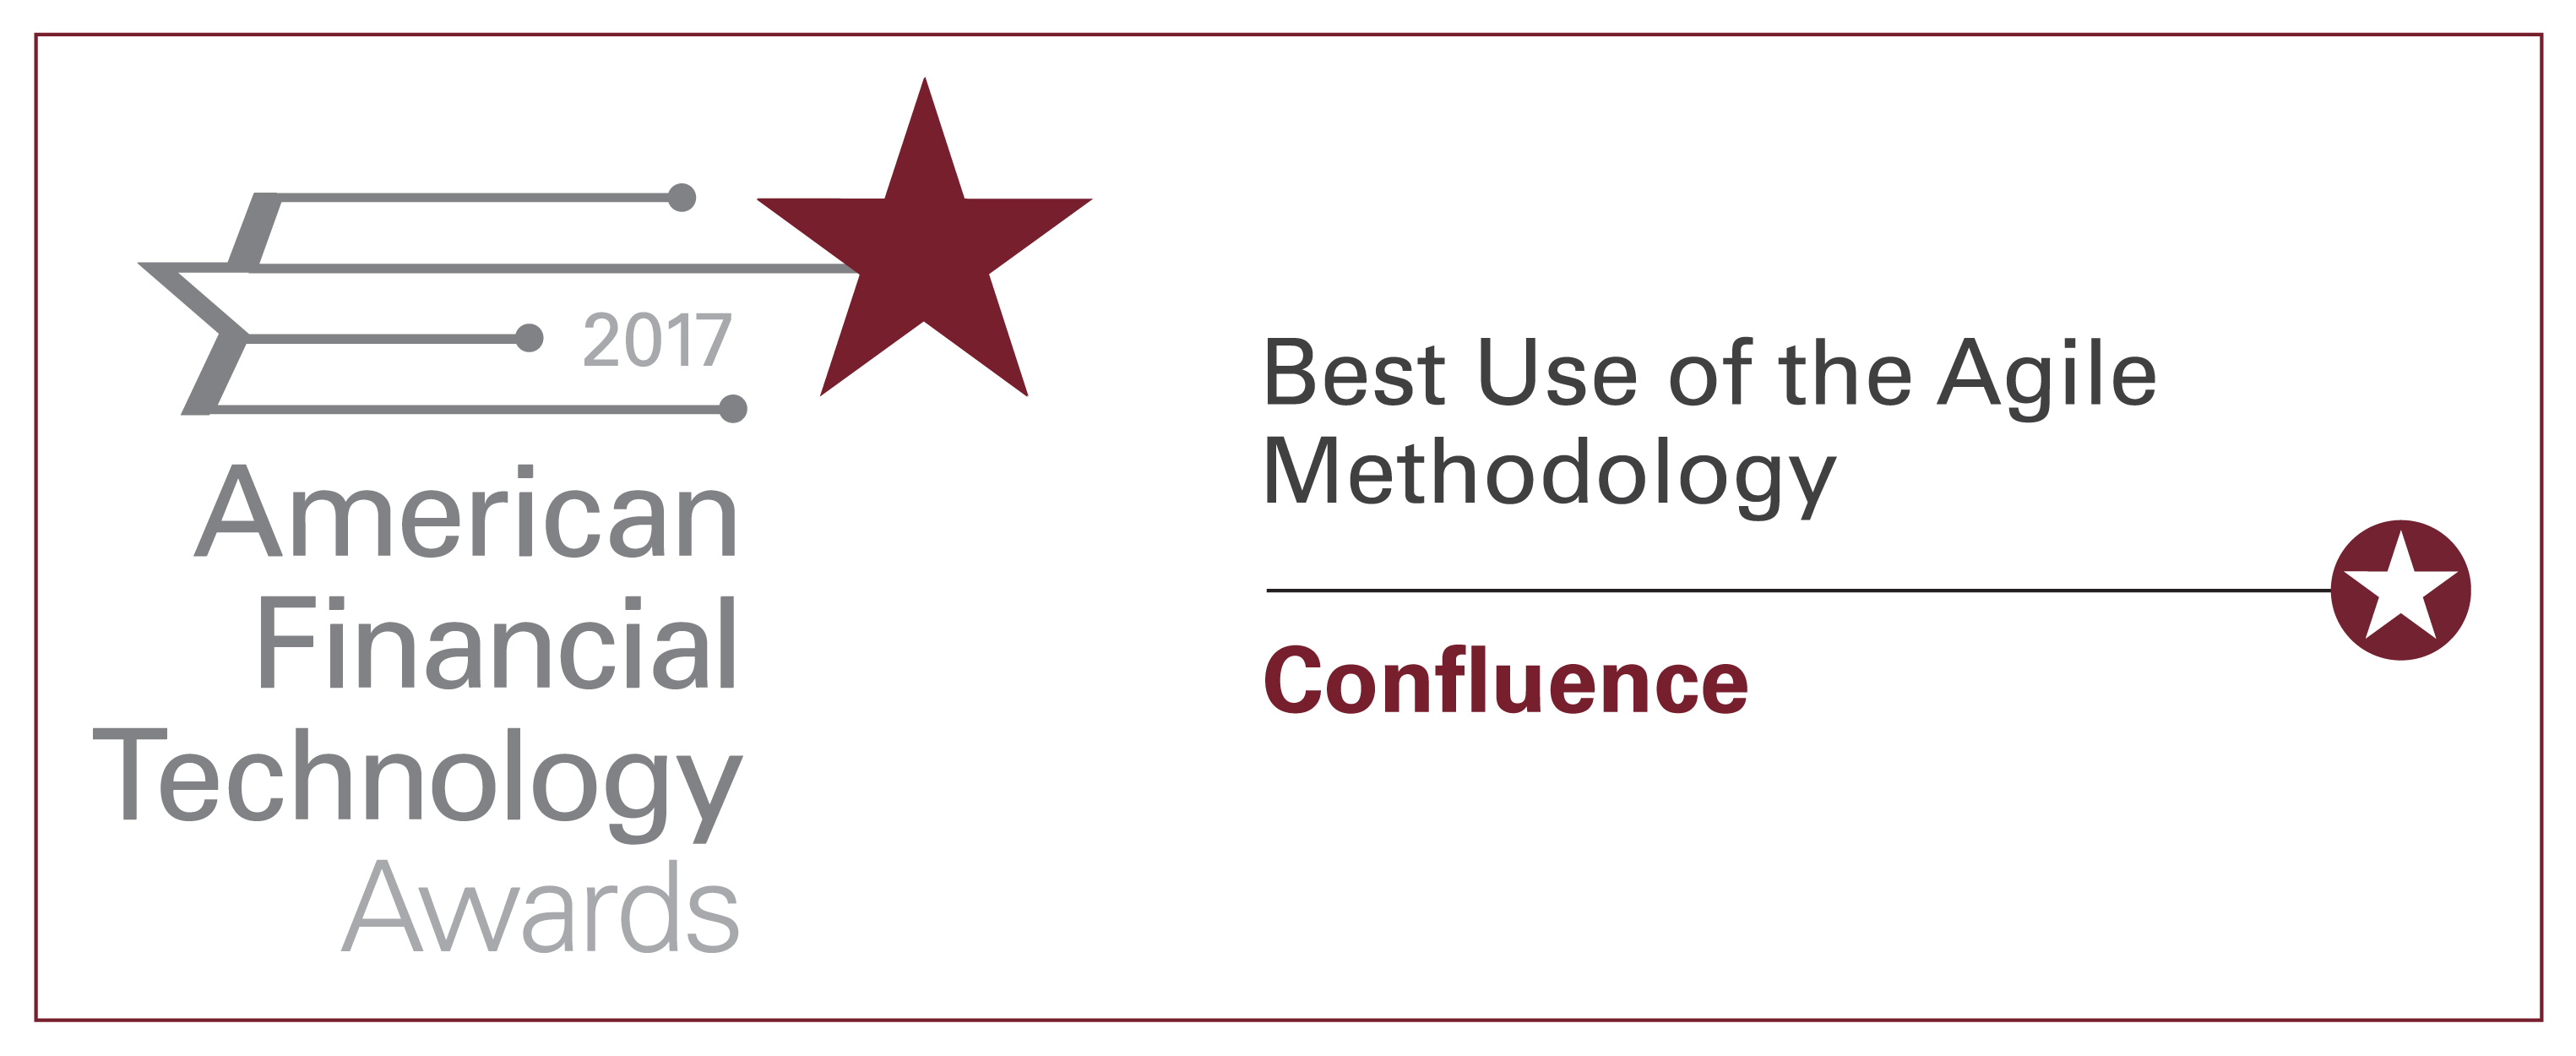 Confluence Wins “Best Use of the Agile Methodology” at 2017 American Financial Technical Awards thumbnail